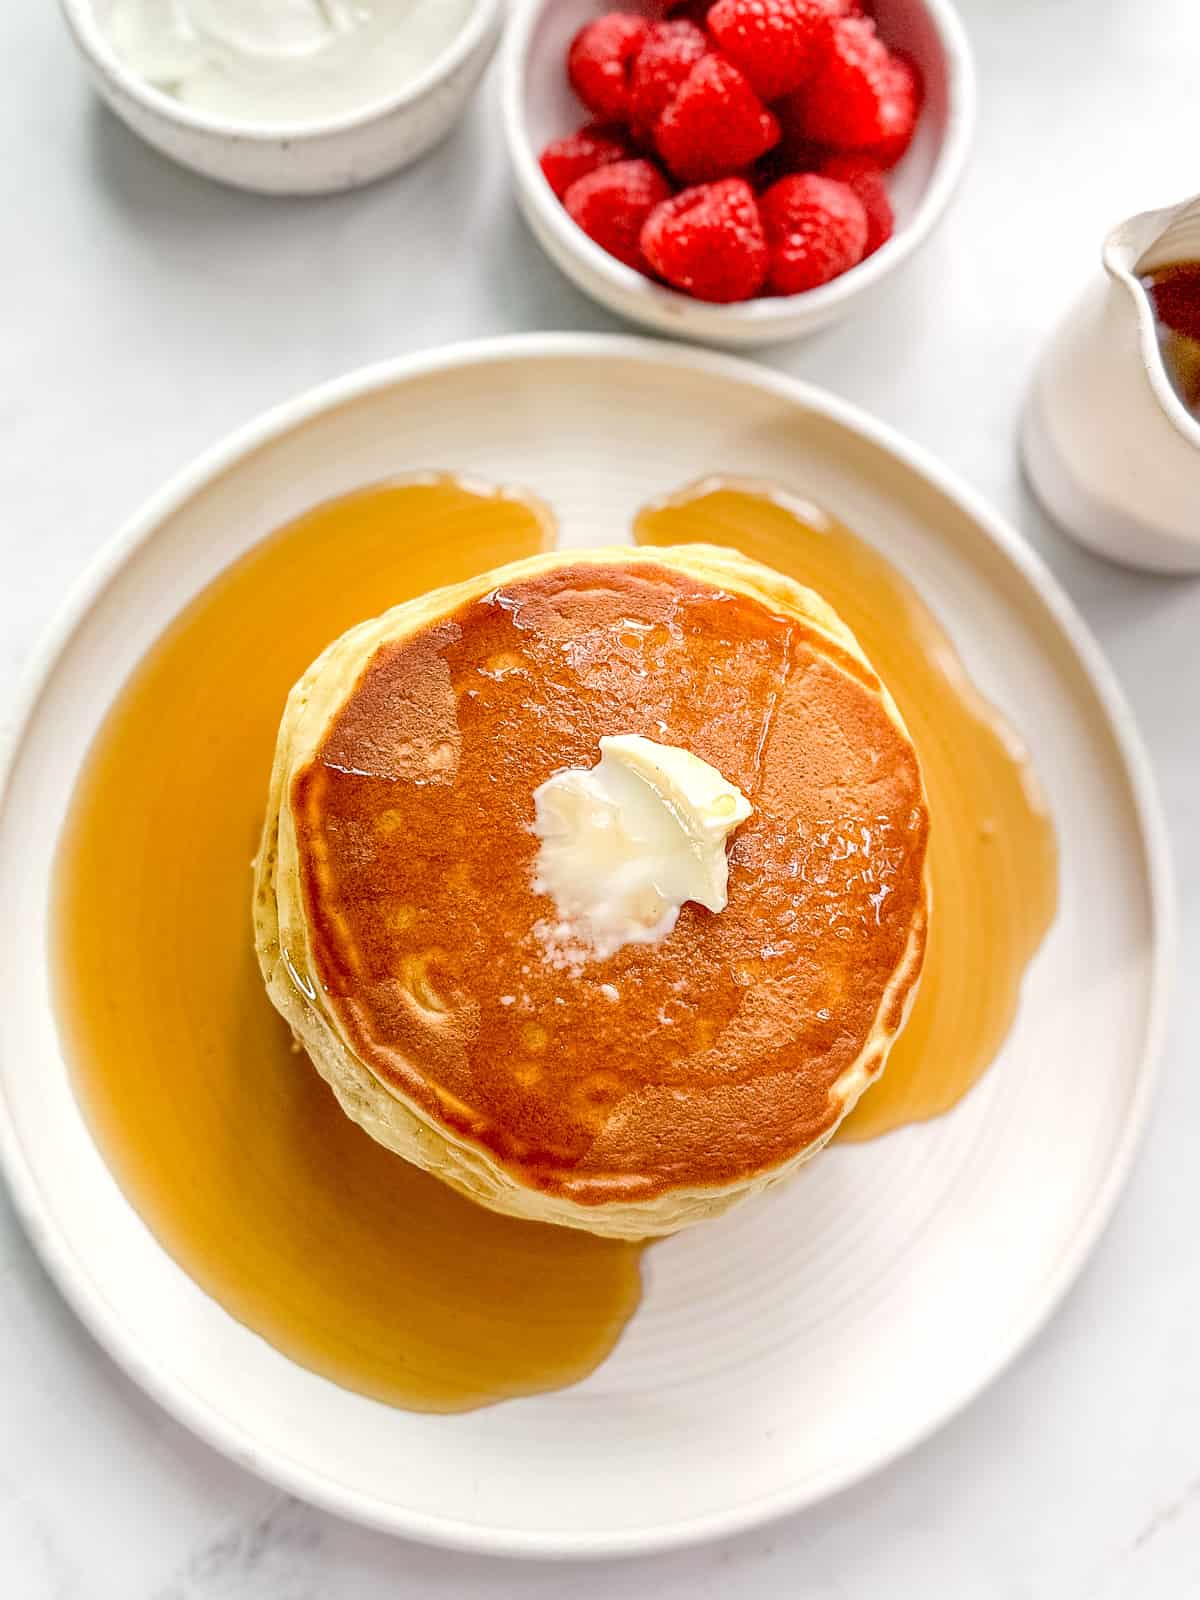 A stack of yogurt pancakes with syrup.